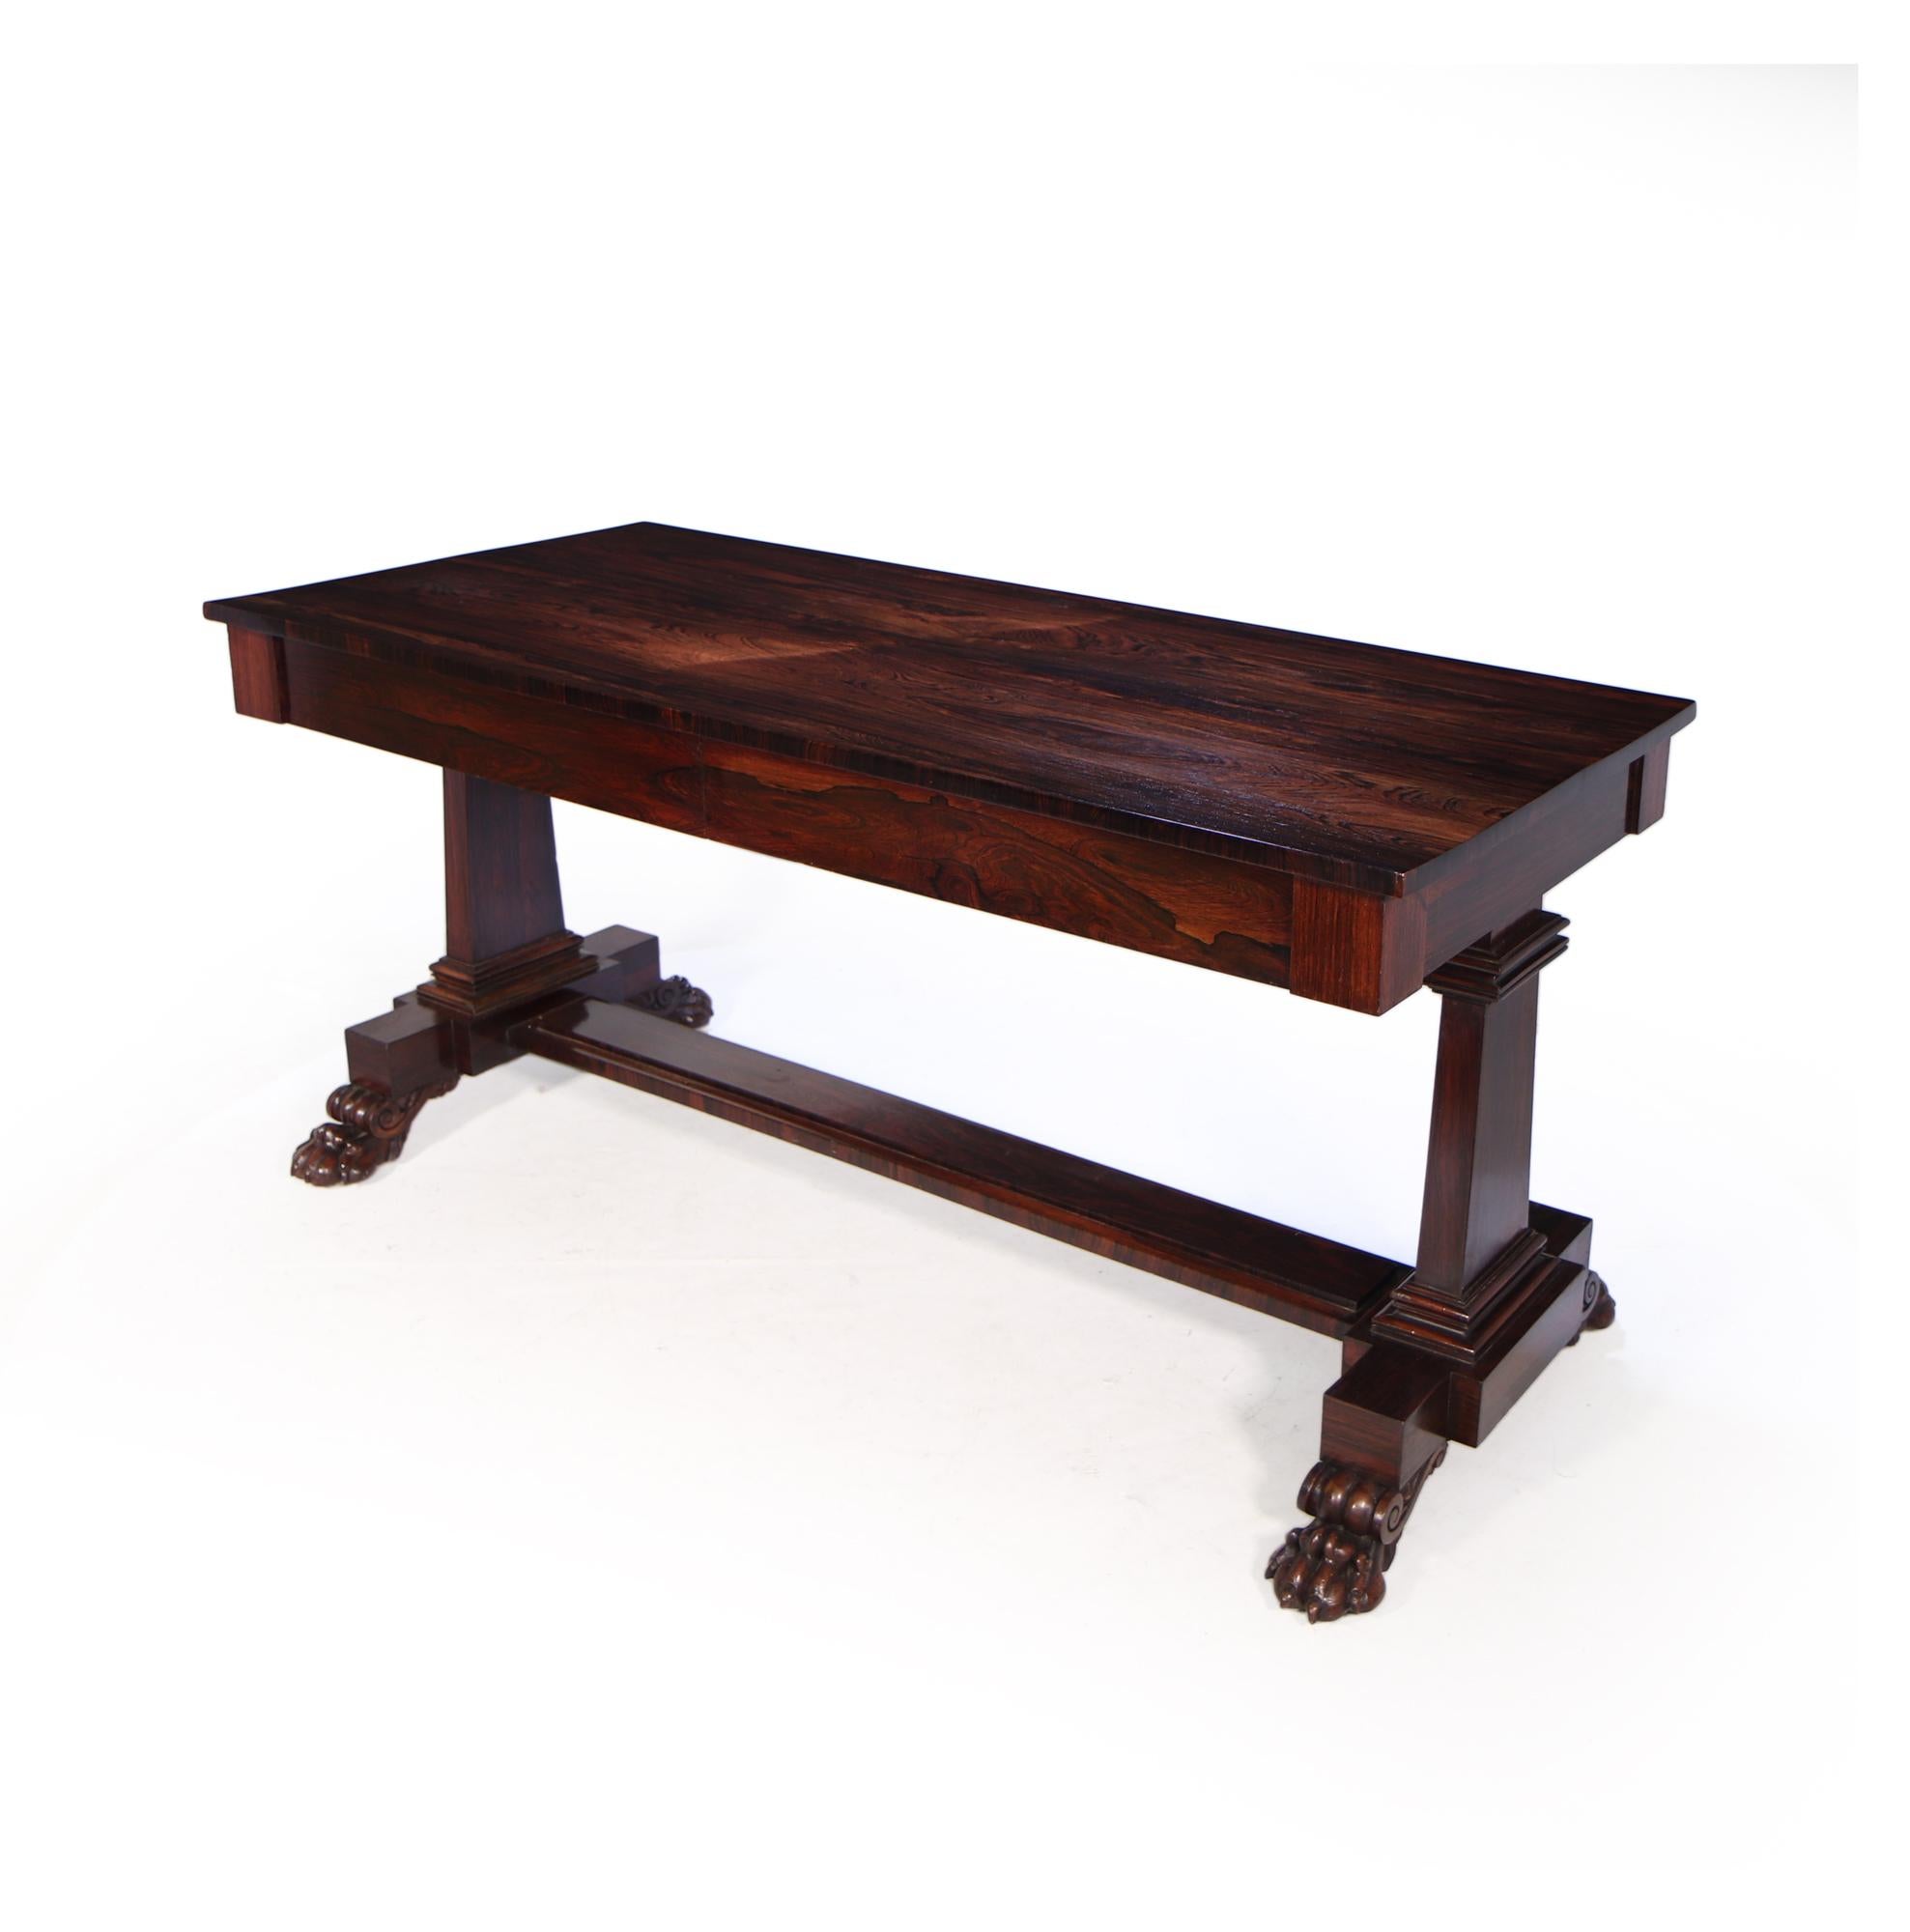 produced in England c1840 this highly figured rosewood library table has two blind freize drawers and stands on tapered square legs and terminates on exceptionally well carved ball and lion claw feet with fitted brass castors underneath, this